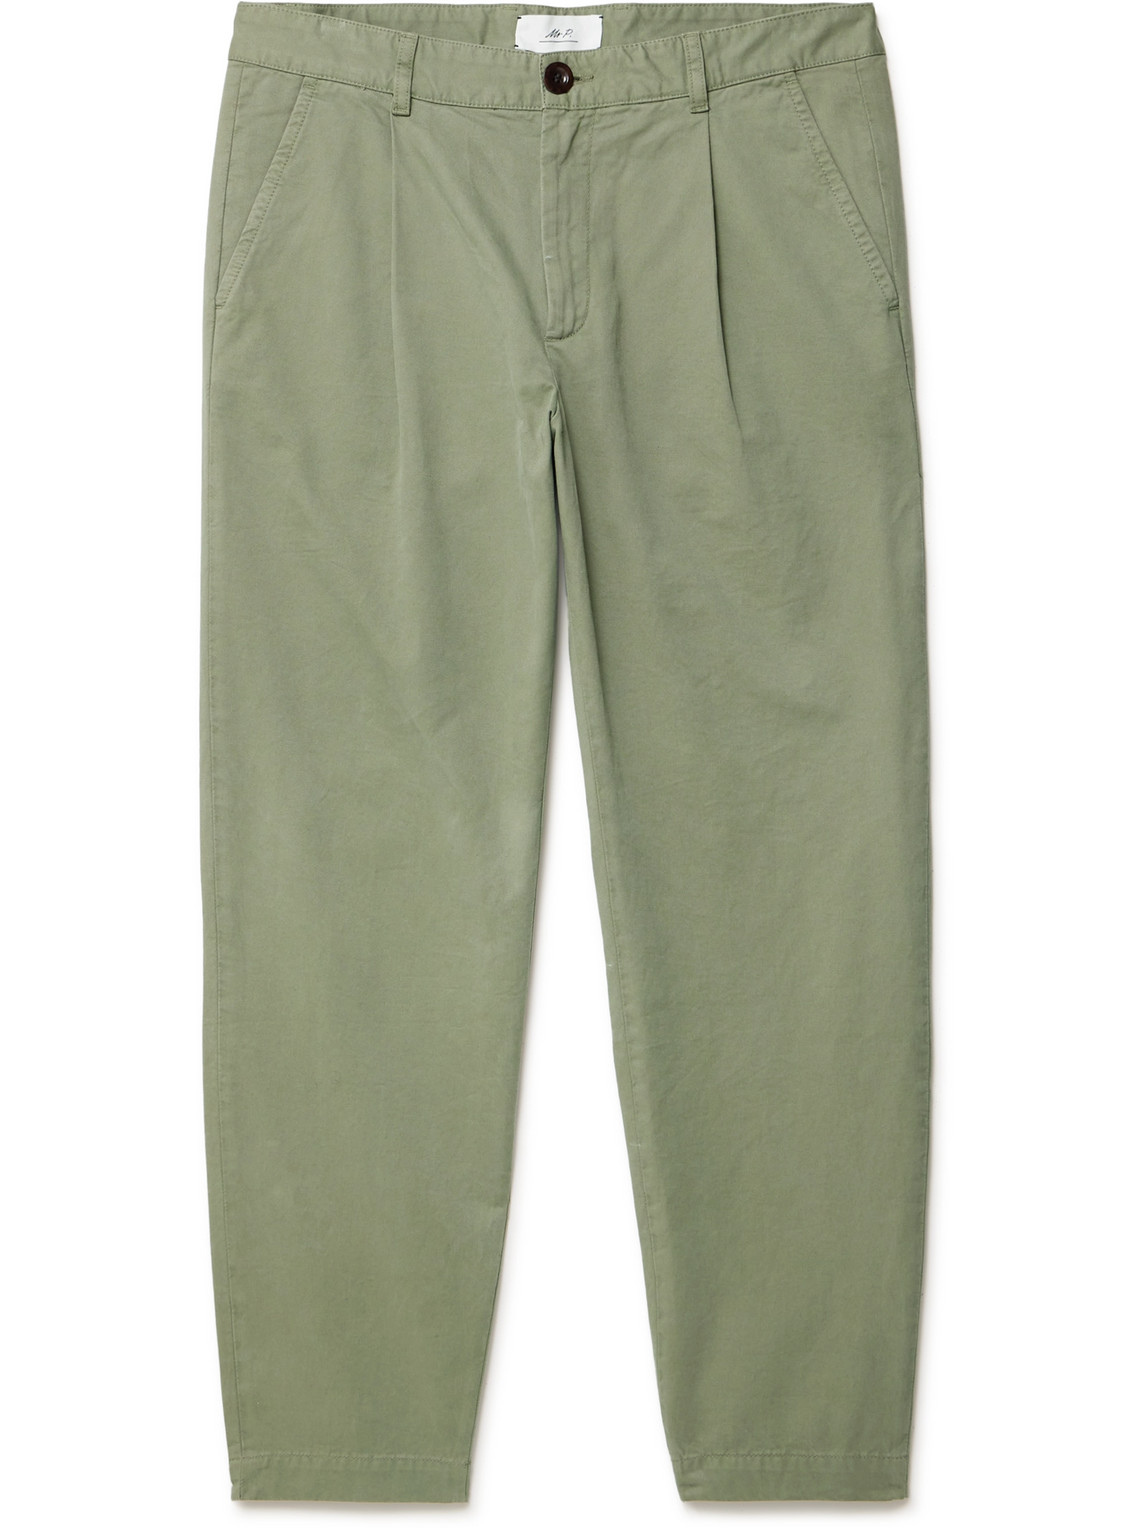 Mr P. - Tapered Pleated Garment-Dyed Cotton-Blend Twill Trousers - Men - Green - 32 von Mr P.